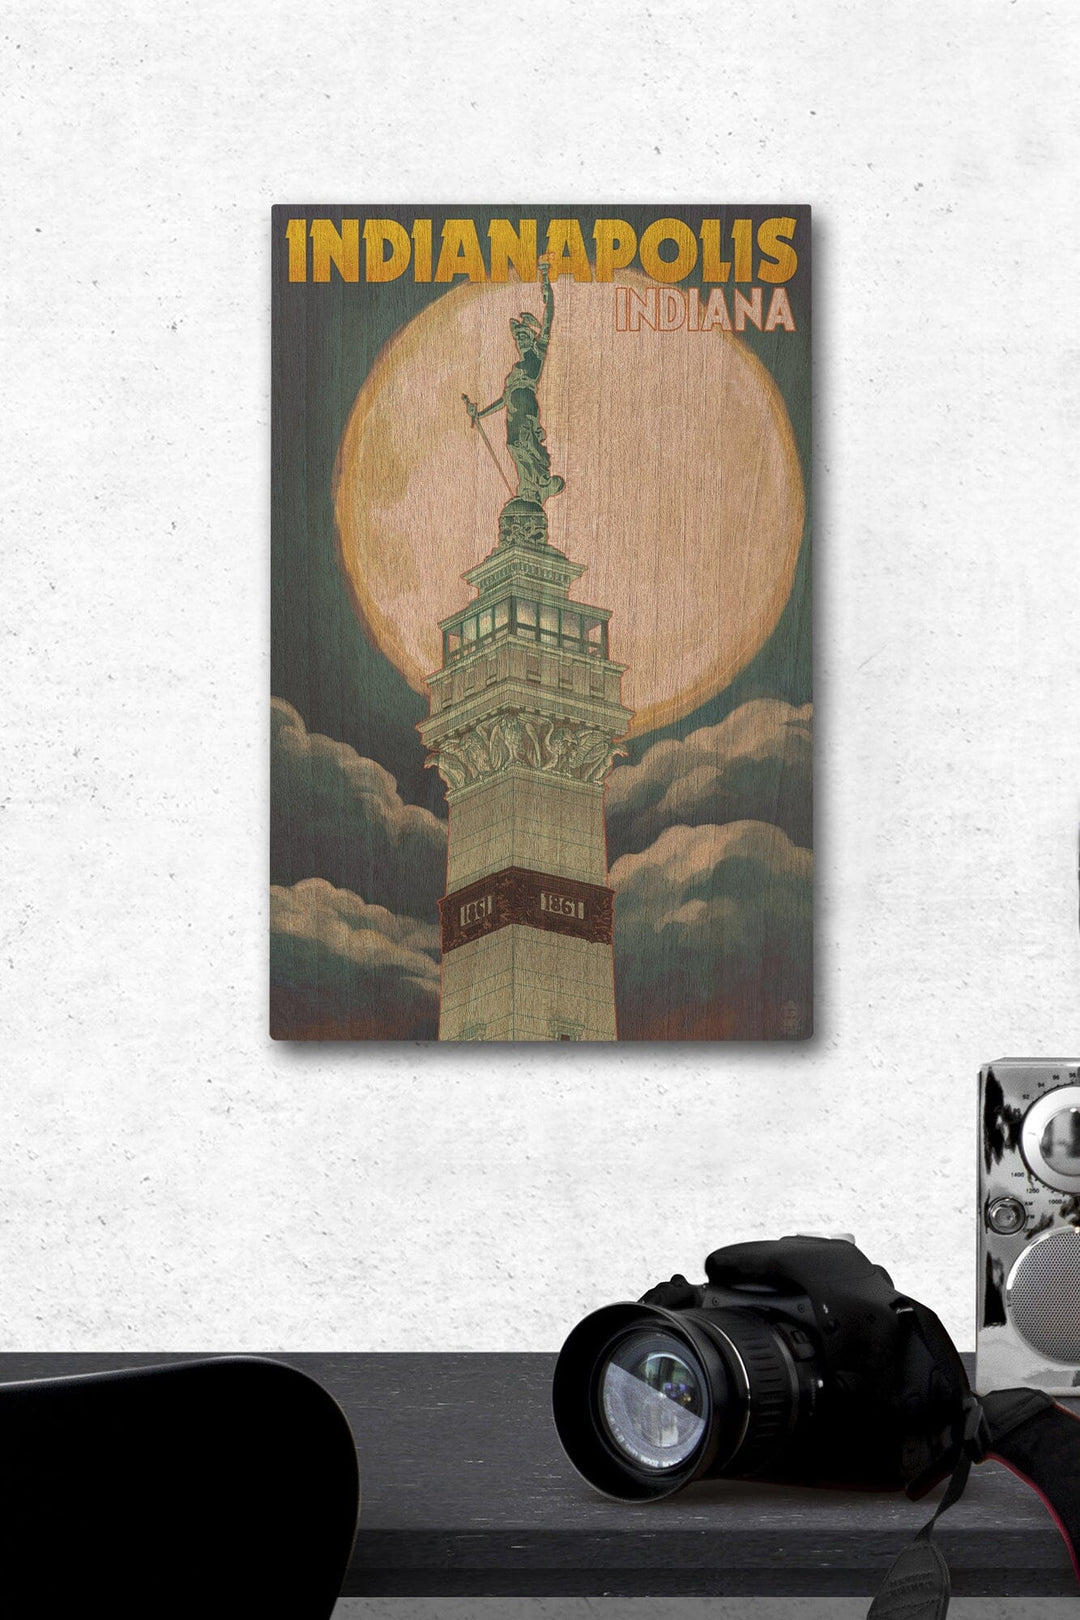 Indianapolis, Indiana, Soldiers' and Sailors' Monument & Moon, Lantern Press Artwork, Wood Signs and Postcards Wood Lantern Press 12 x 18 Wood Gallery Print 